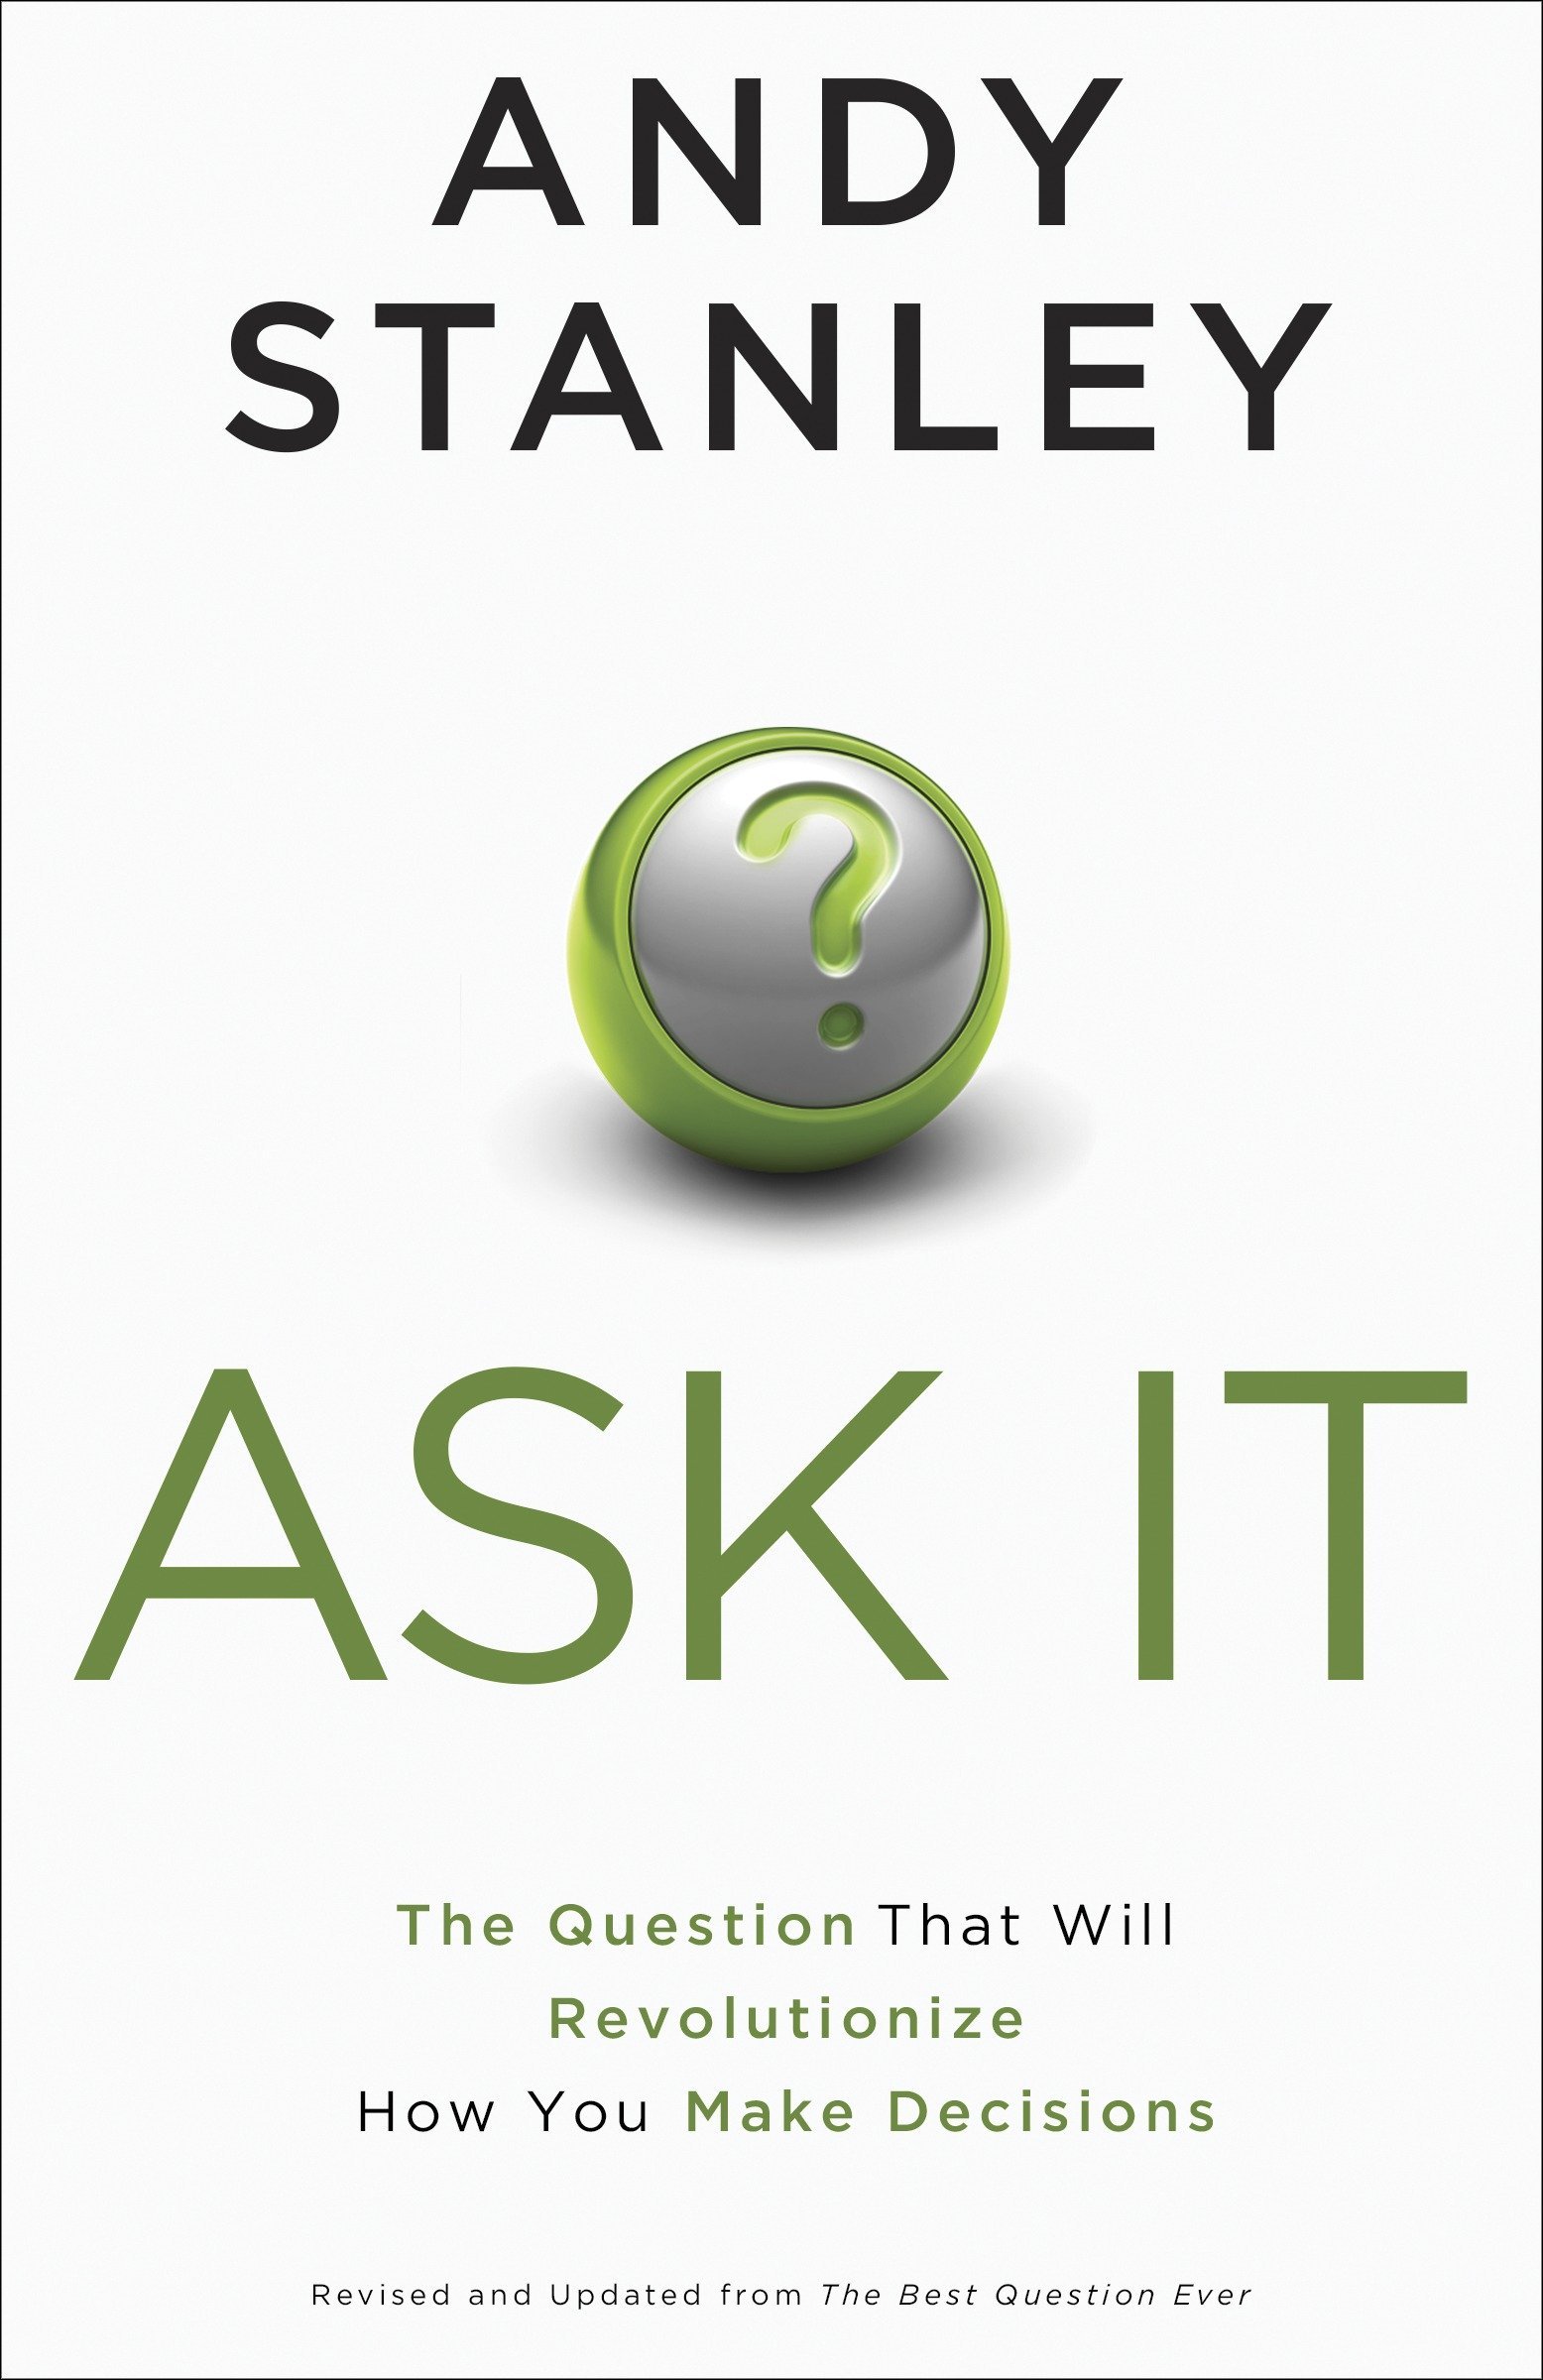 Book cover of Ask It: The Question That Will Revolutionize How You Make Decisions by Andy Stanley.